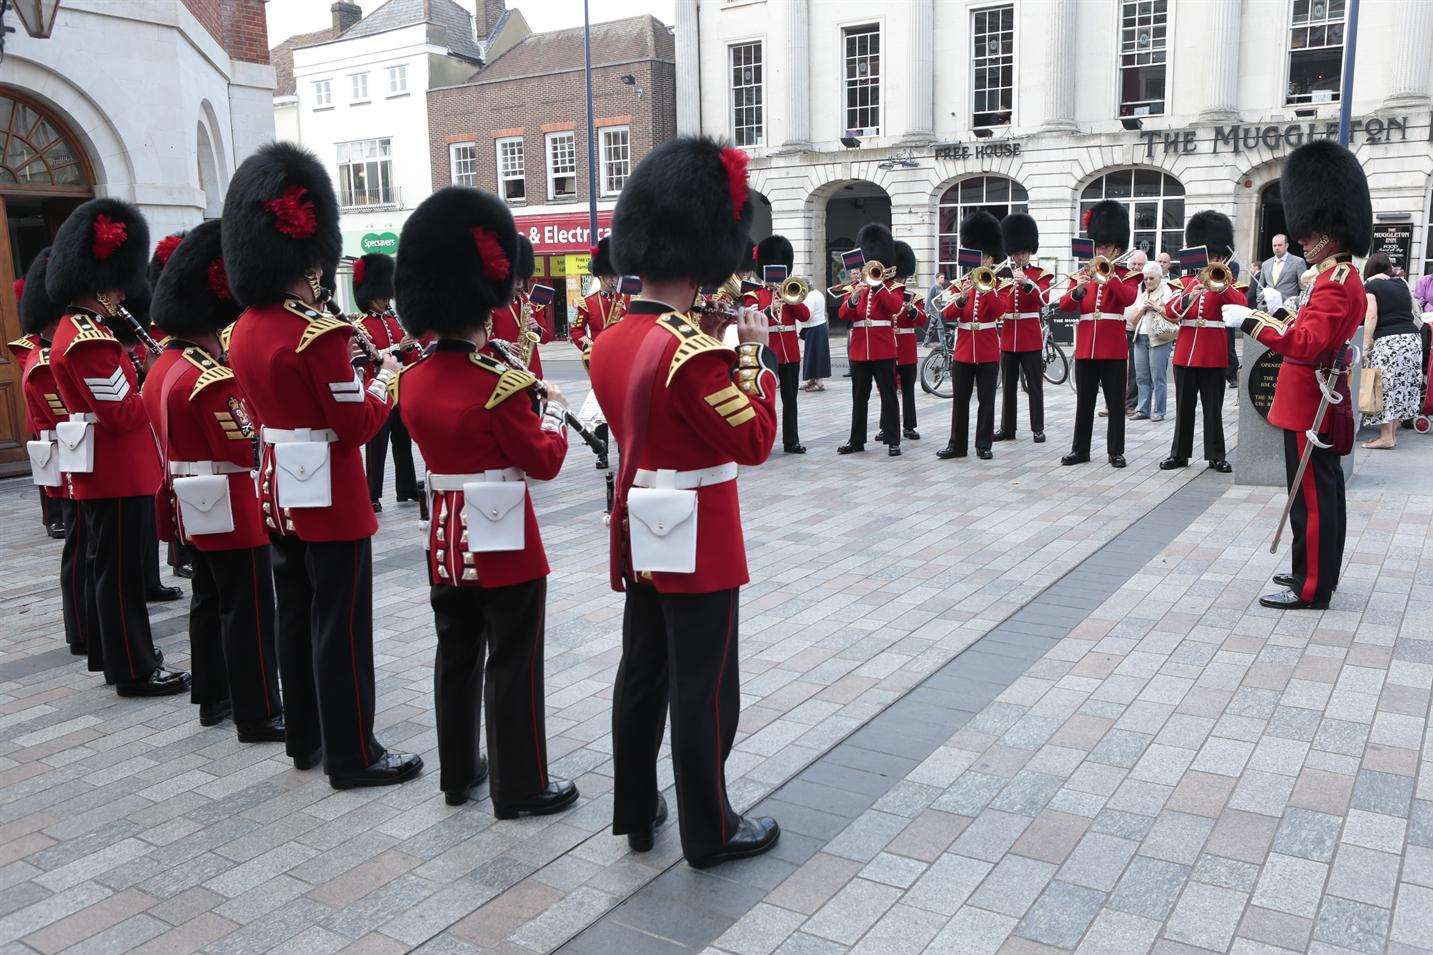 The band take position outside the Town Hall